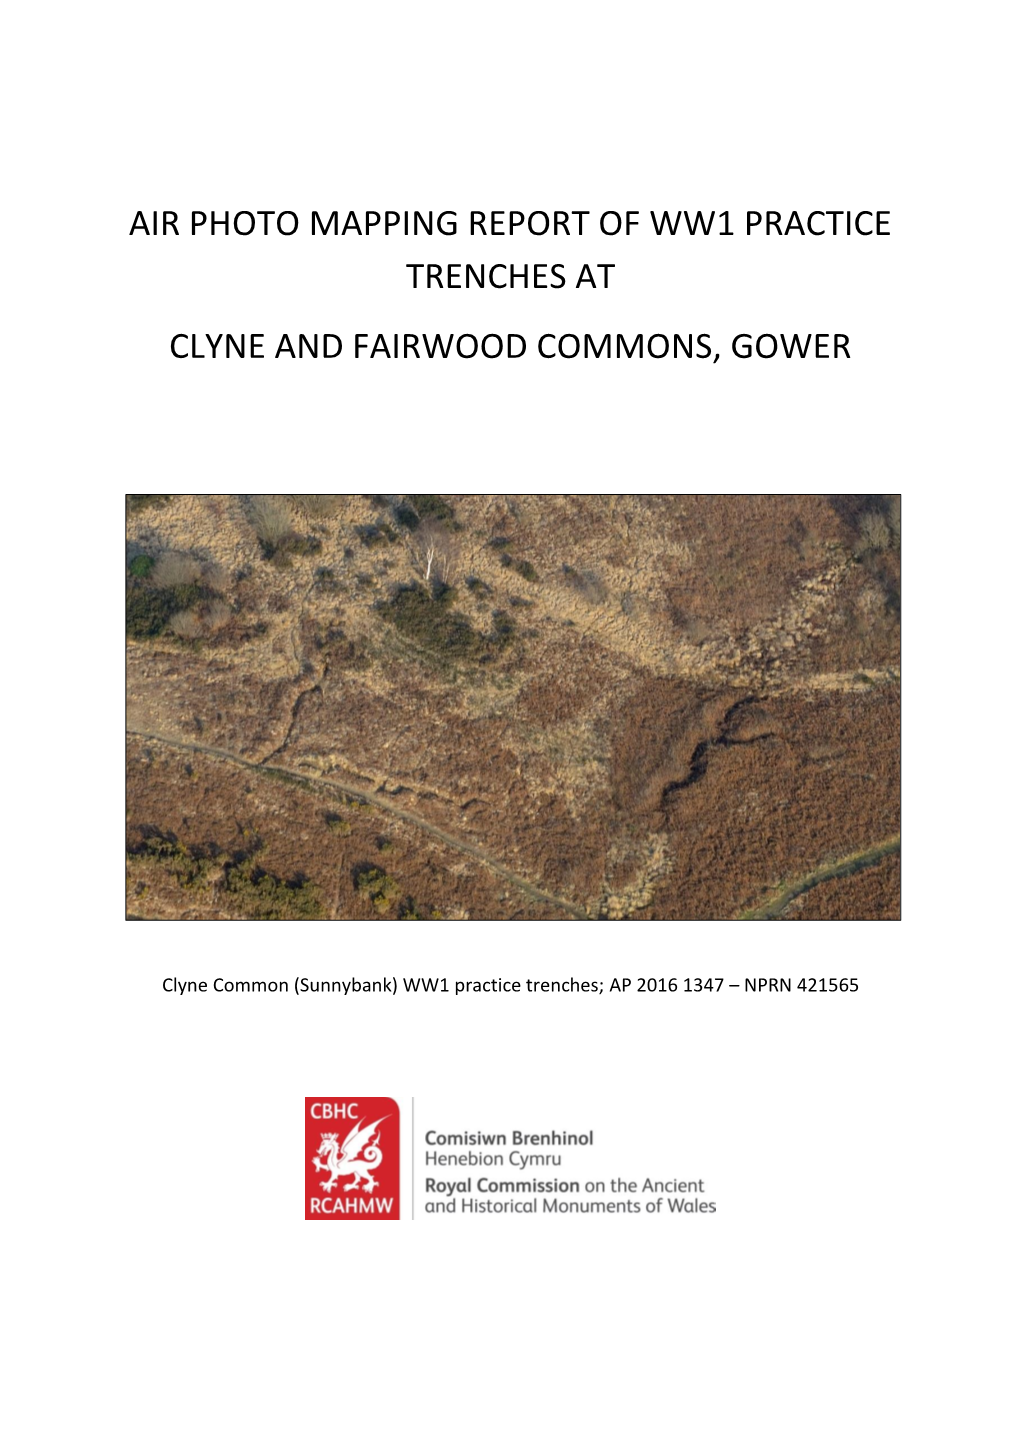 Air Photo Mapping Report of Ww1 Practice Trenches at Clyne and Fairwood Commons, Gower